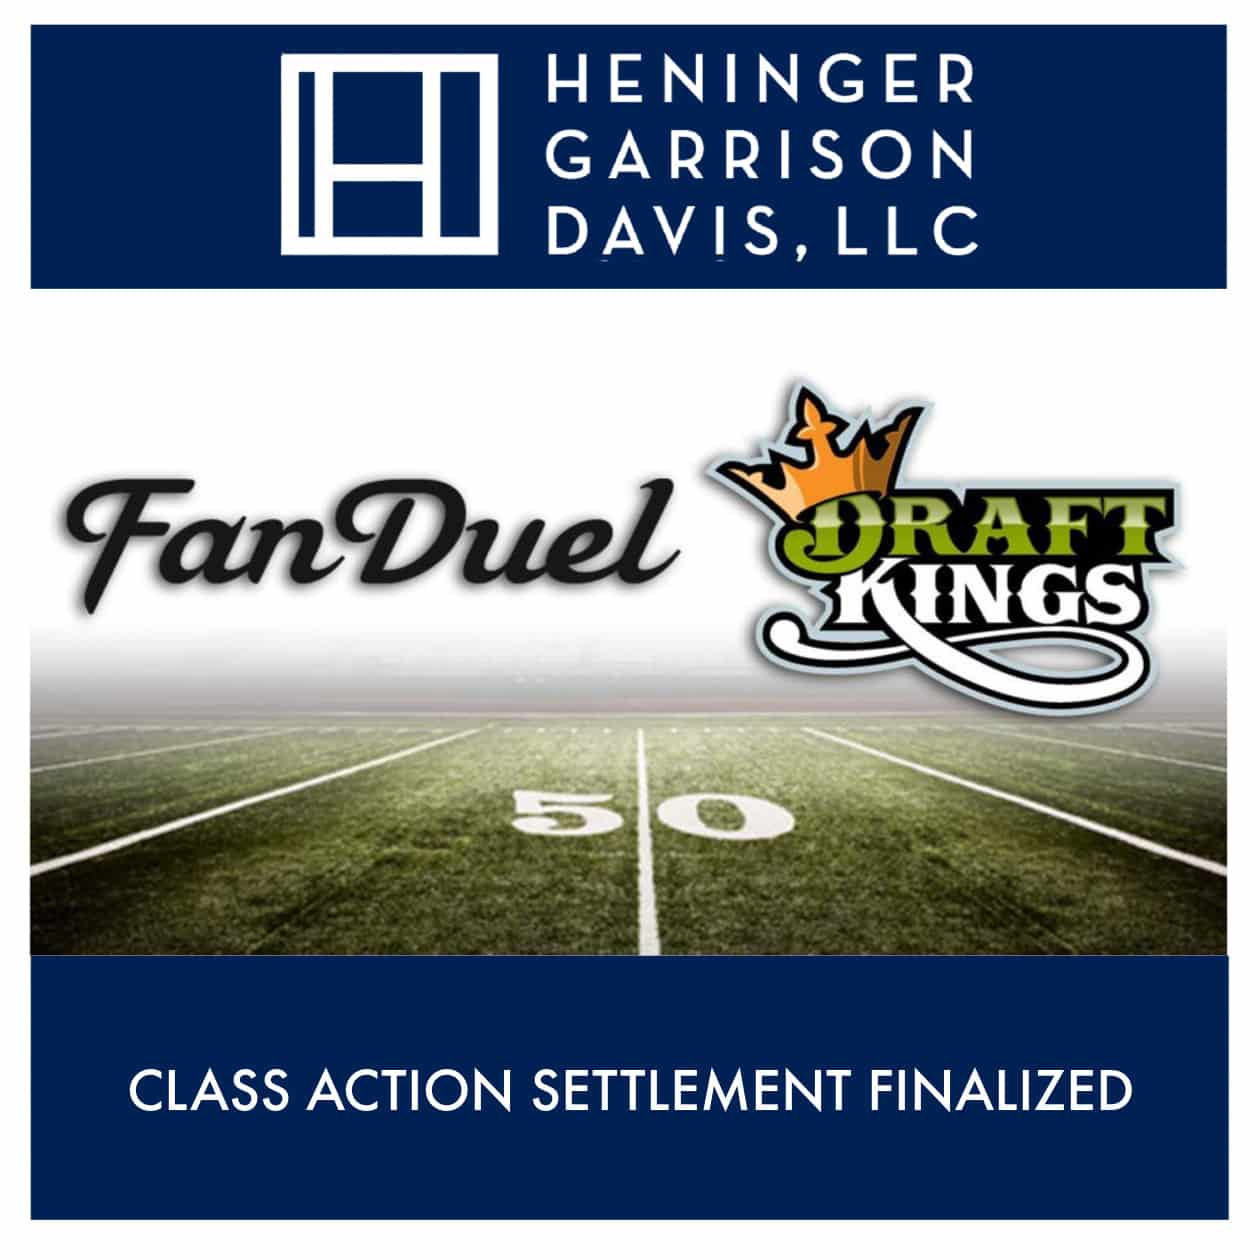 Final Settlement Approved for DraftKings and FanDuel Class Action